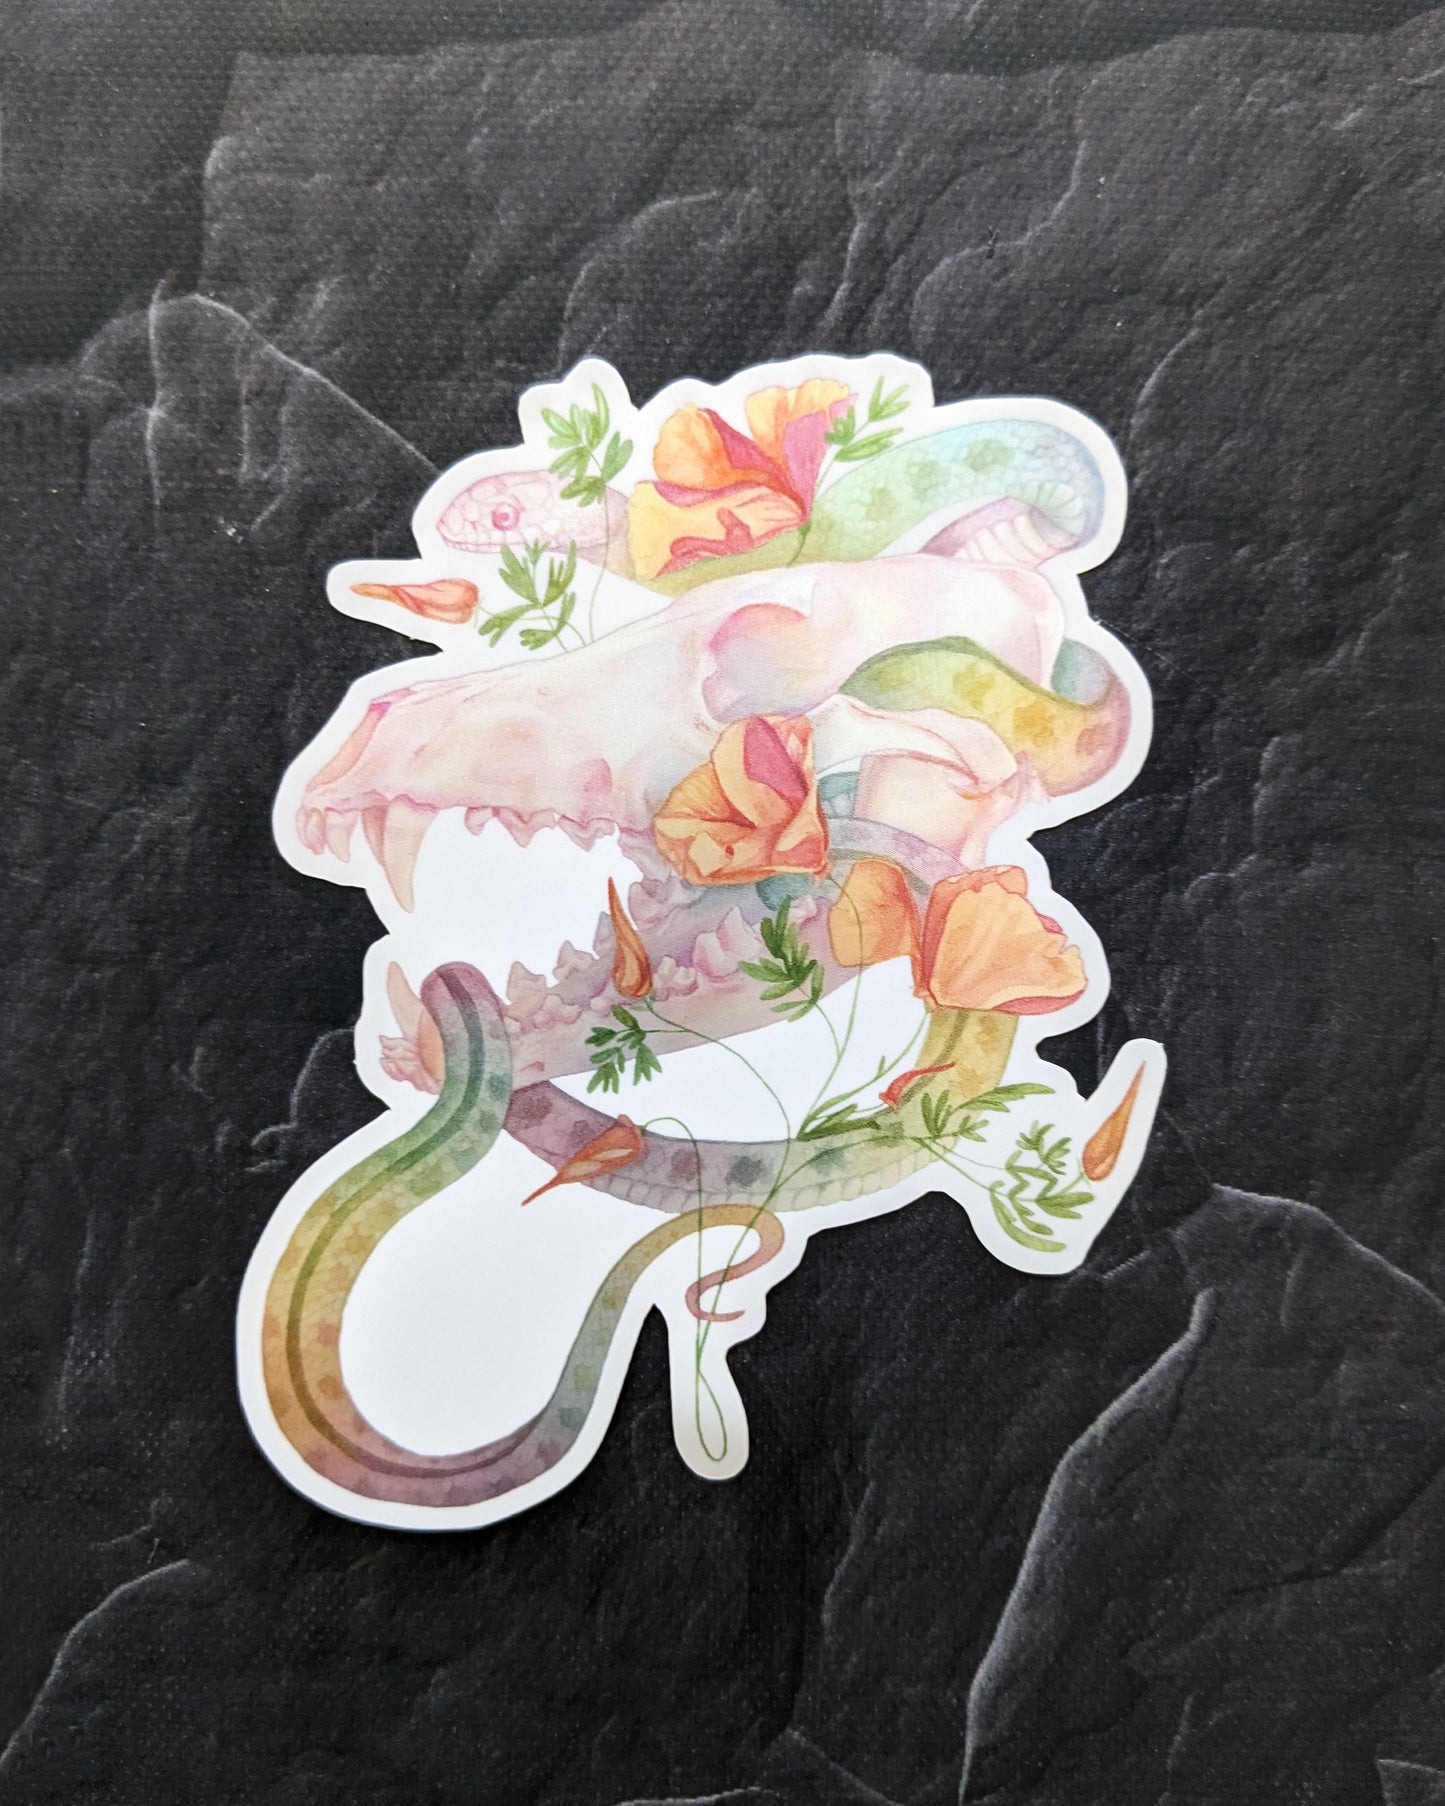 A rainbow snake winds its way around a coyote skull with orange California Poppies in this rainbow holographic sticker